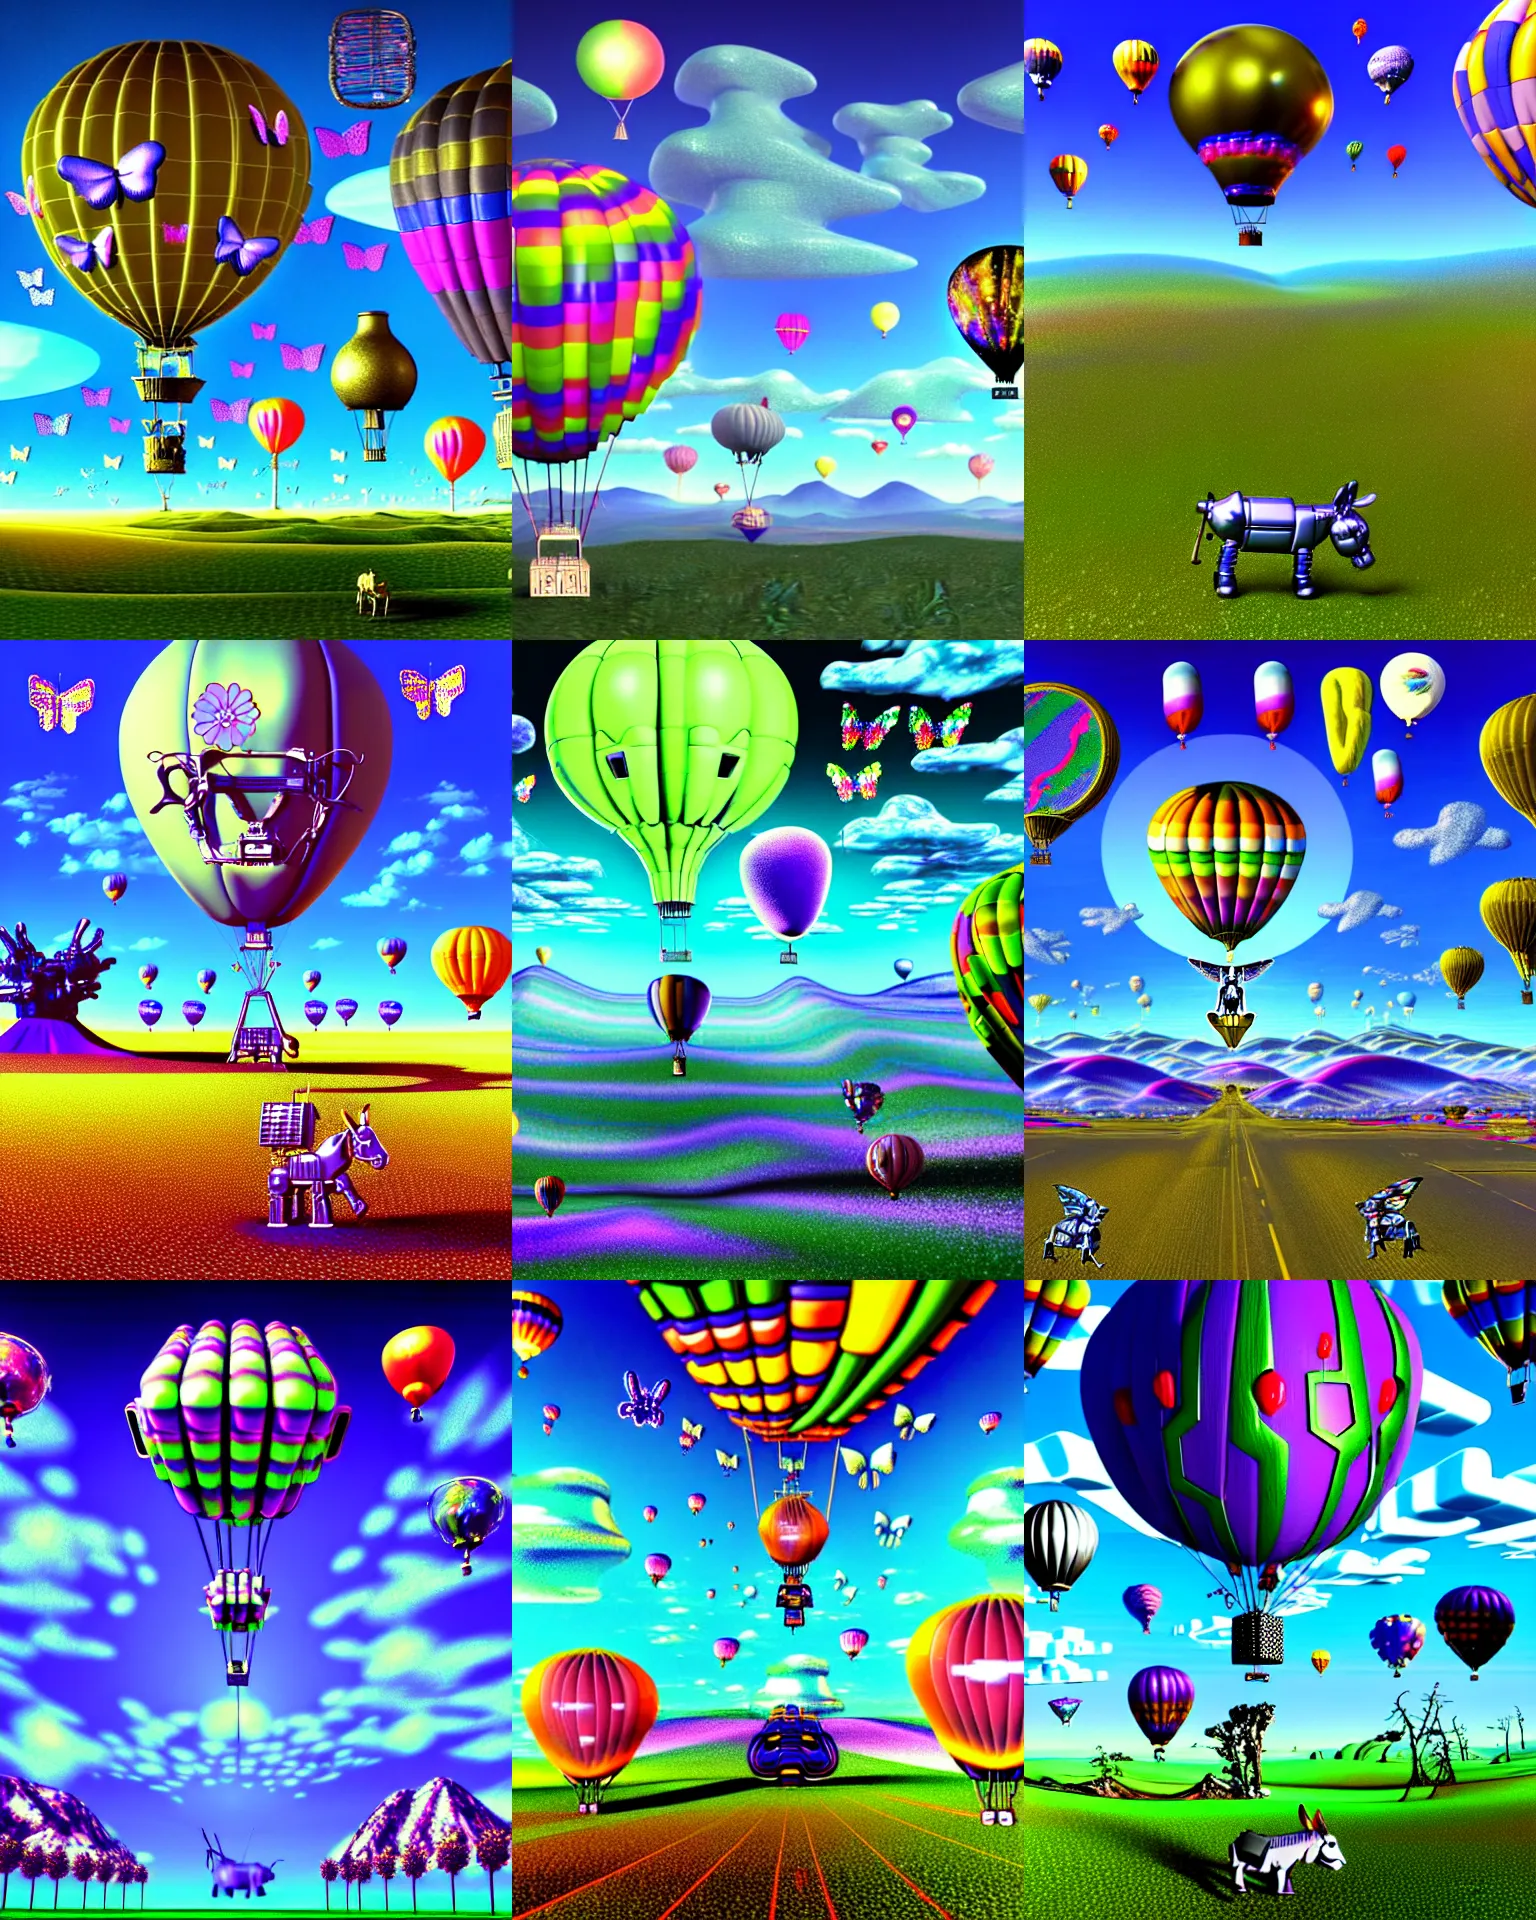 Prompt: 3 d render of cybernetic landscape with cyborg balloon donkey with angel wings and hot air balloons against a psychedelic surreal background with 3 d butterflies and 3 d flowers n the style of 1 9 9 0's cg graphics, lsd dream emulator psx, 3 d rendered y 2 k aesthetic by ichiro tanida, 3 do magazine, wide shot